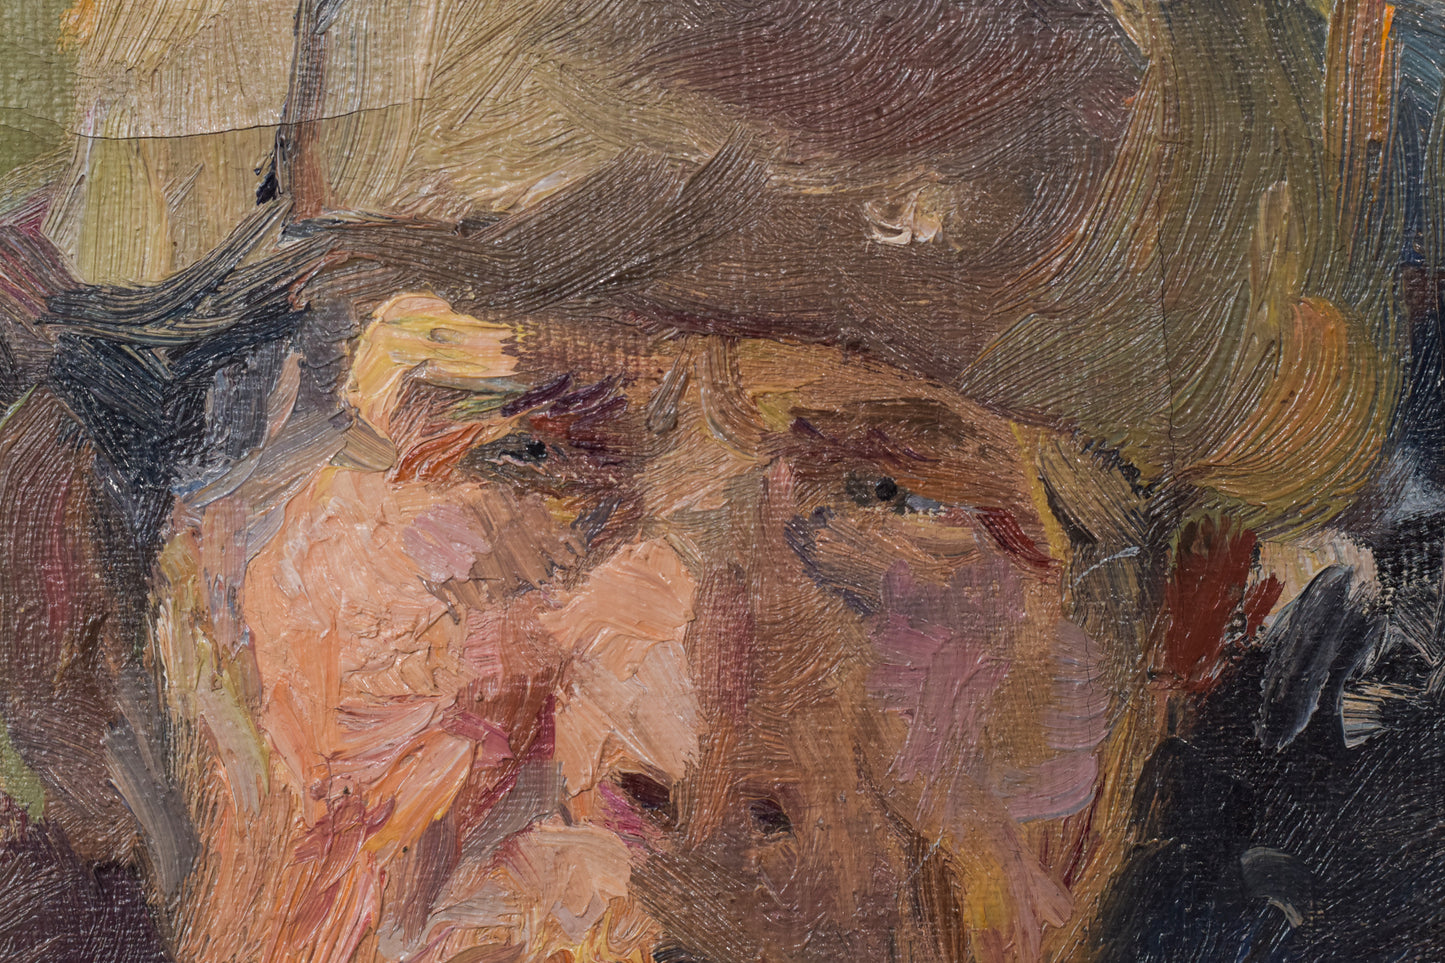 Oil Sketch of a Russian Soldier